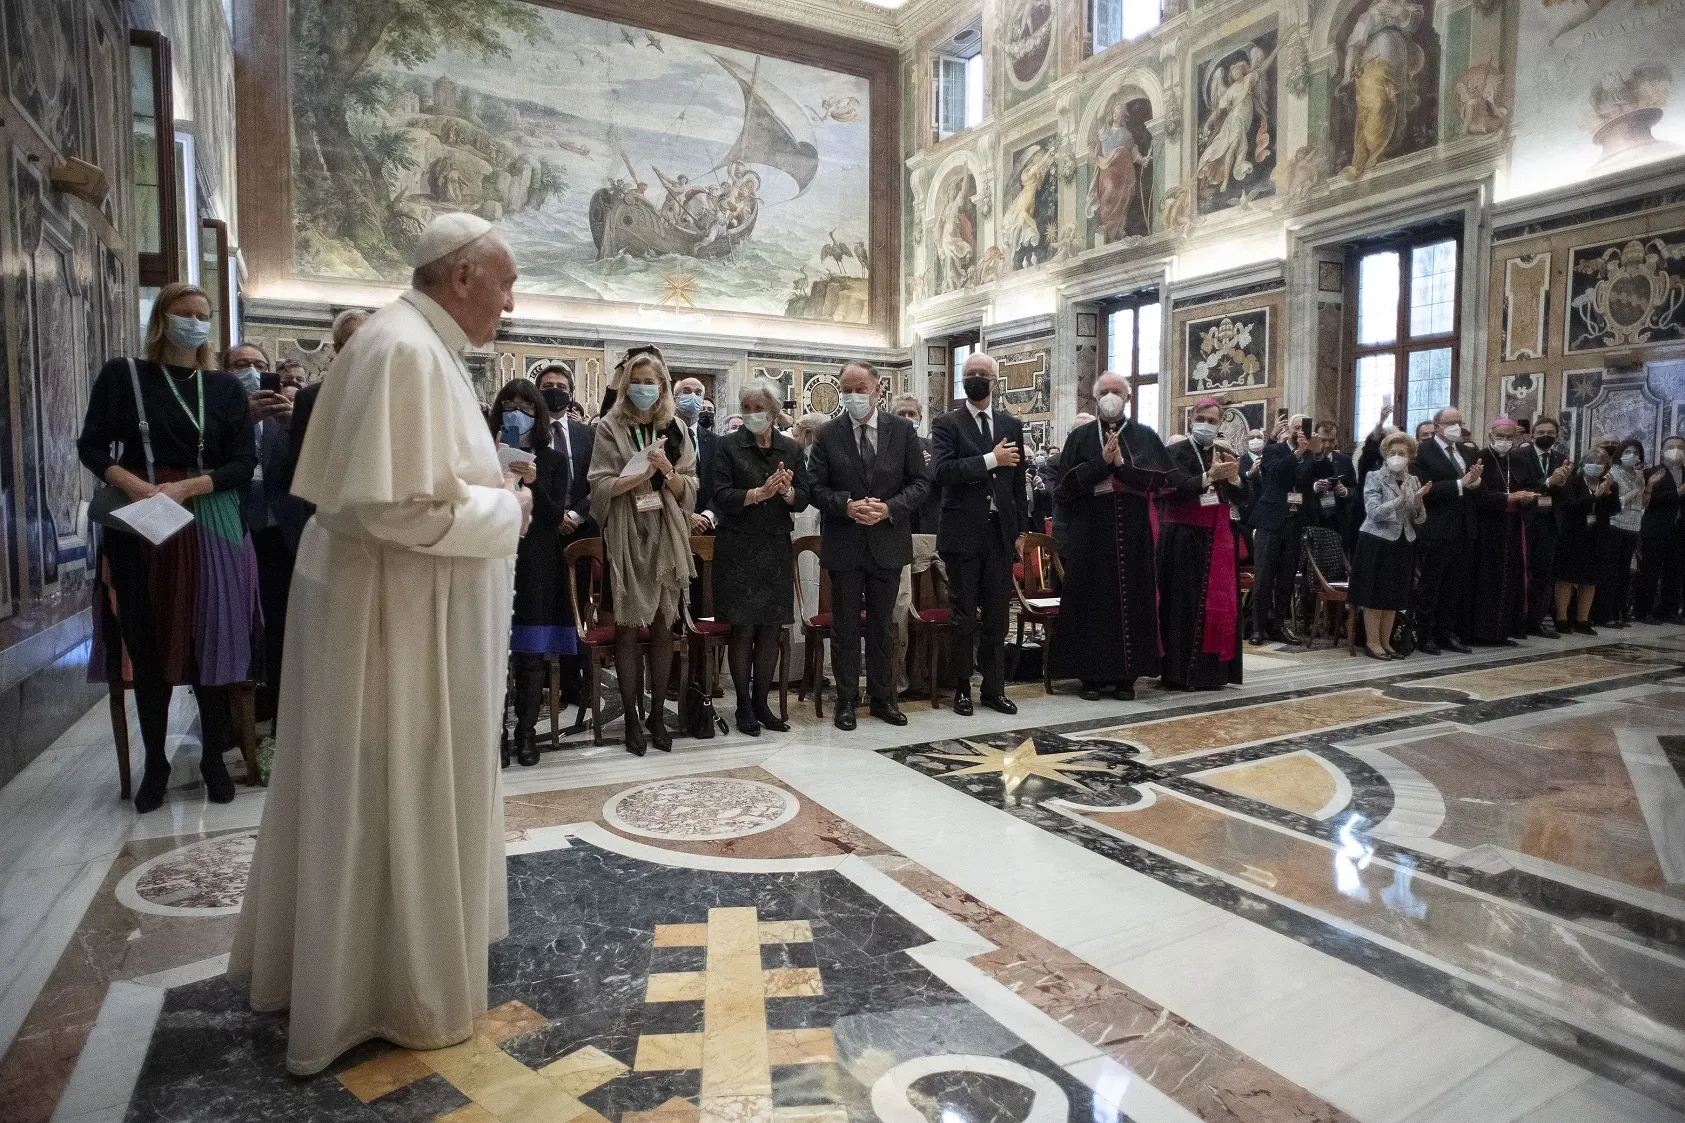 Pope Francis meets with the Centesimus Annus Pro Pontifice Foundation at the Vatican on Oct. 23, 2021. Vatican Media